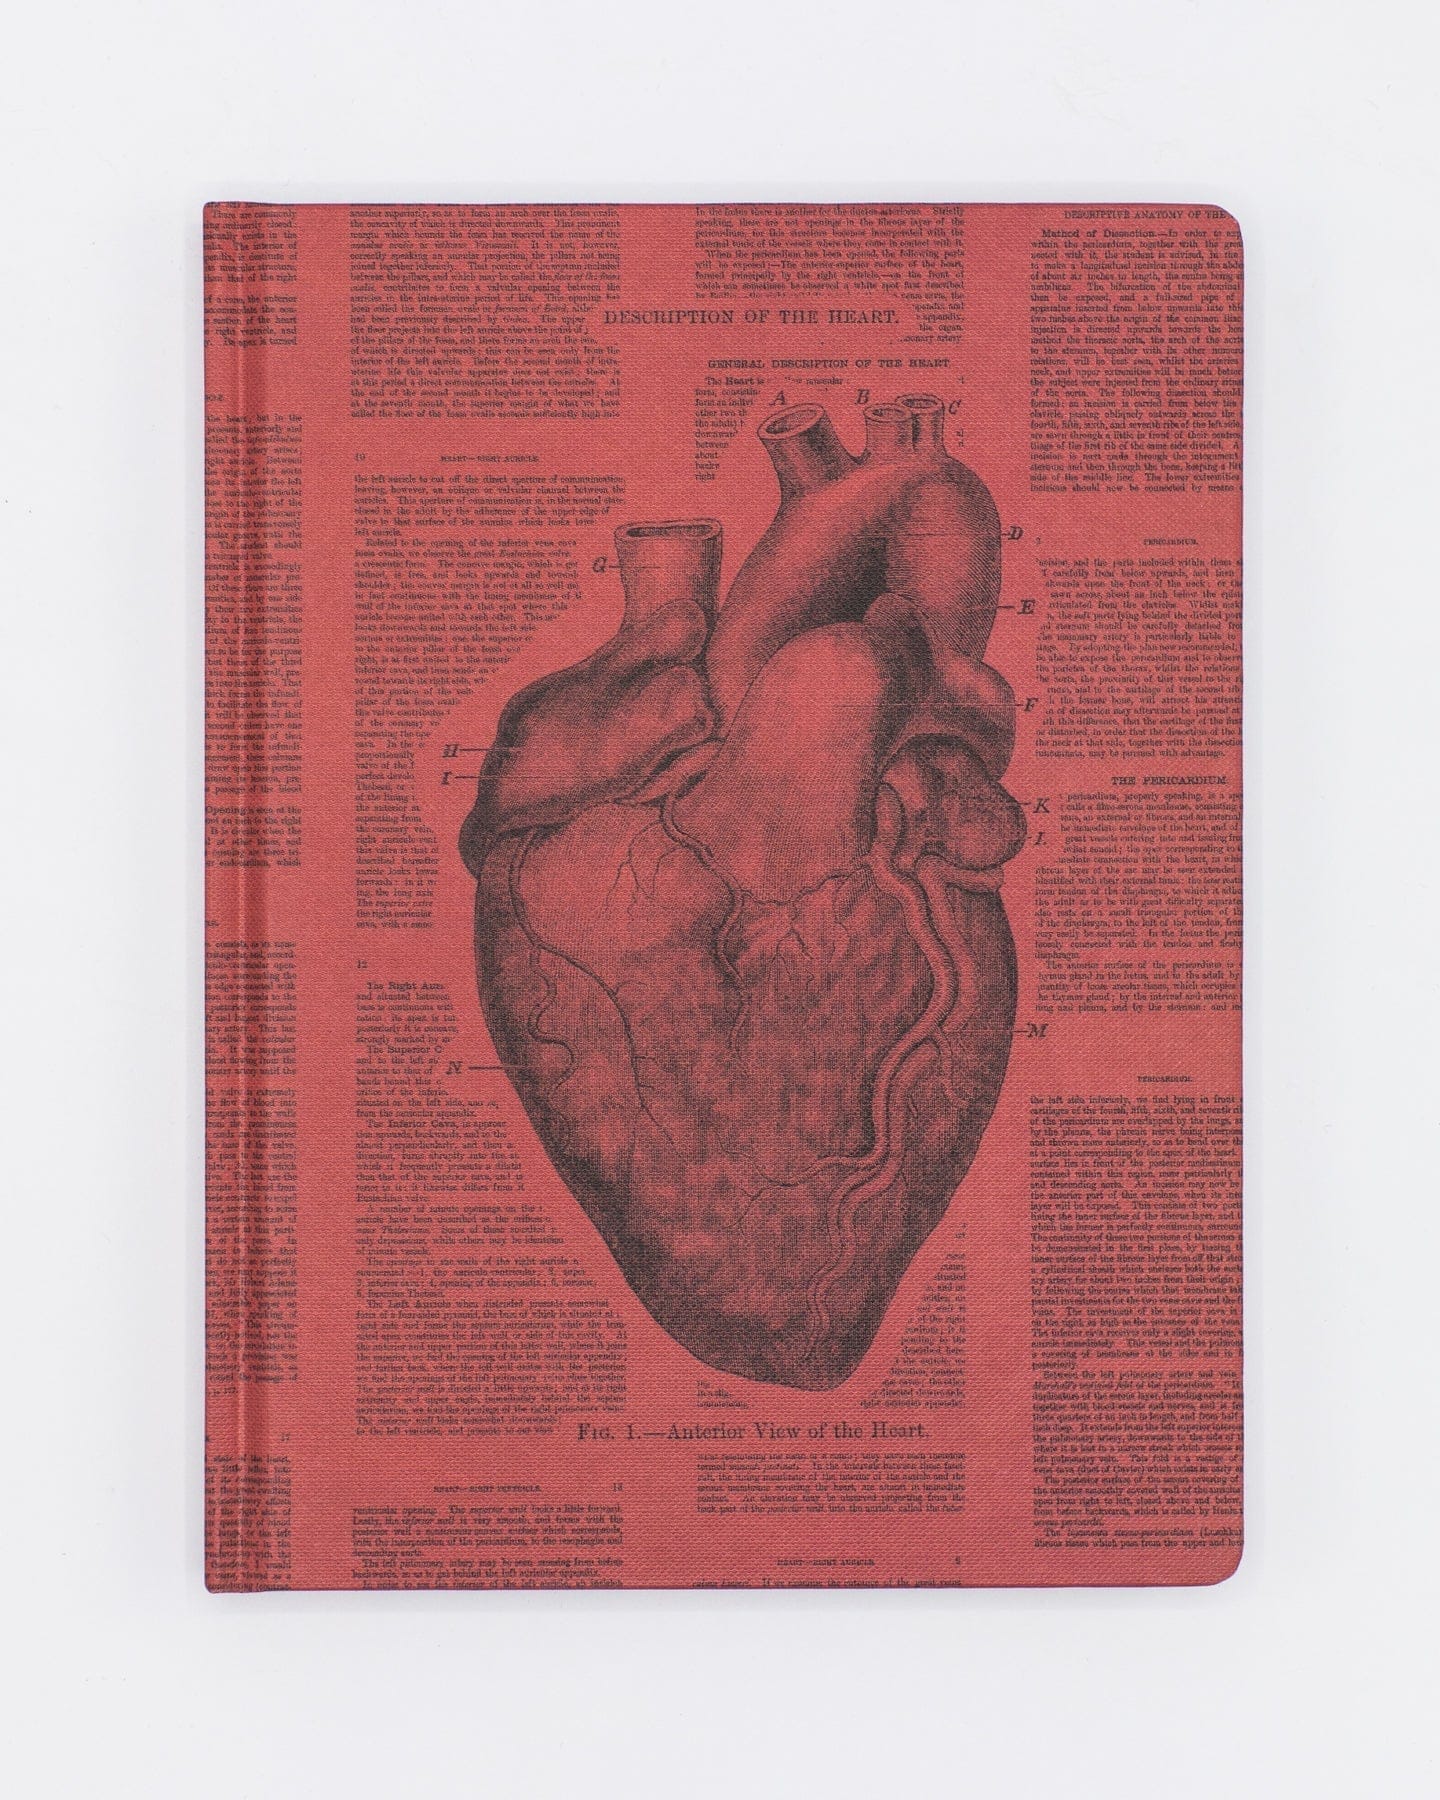 Anatomical Heart Hardcover - Lined/Grid Cognitive Surplus